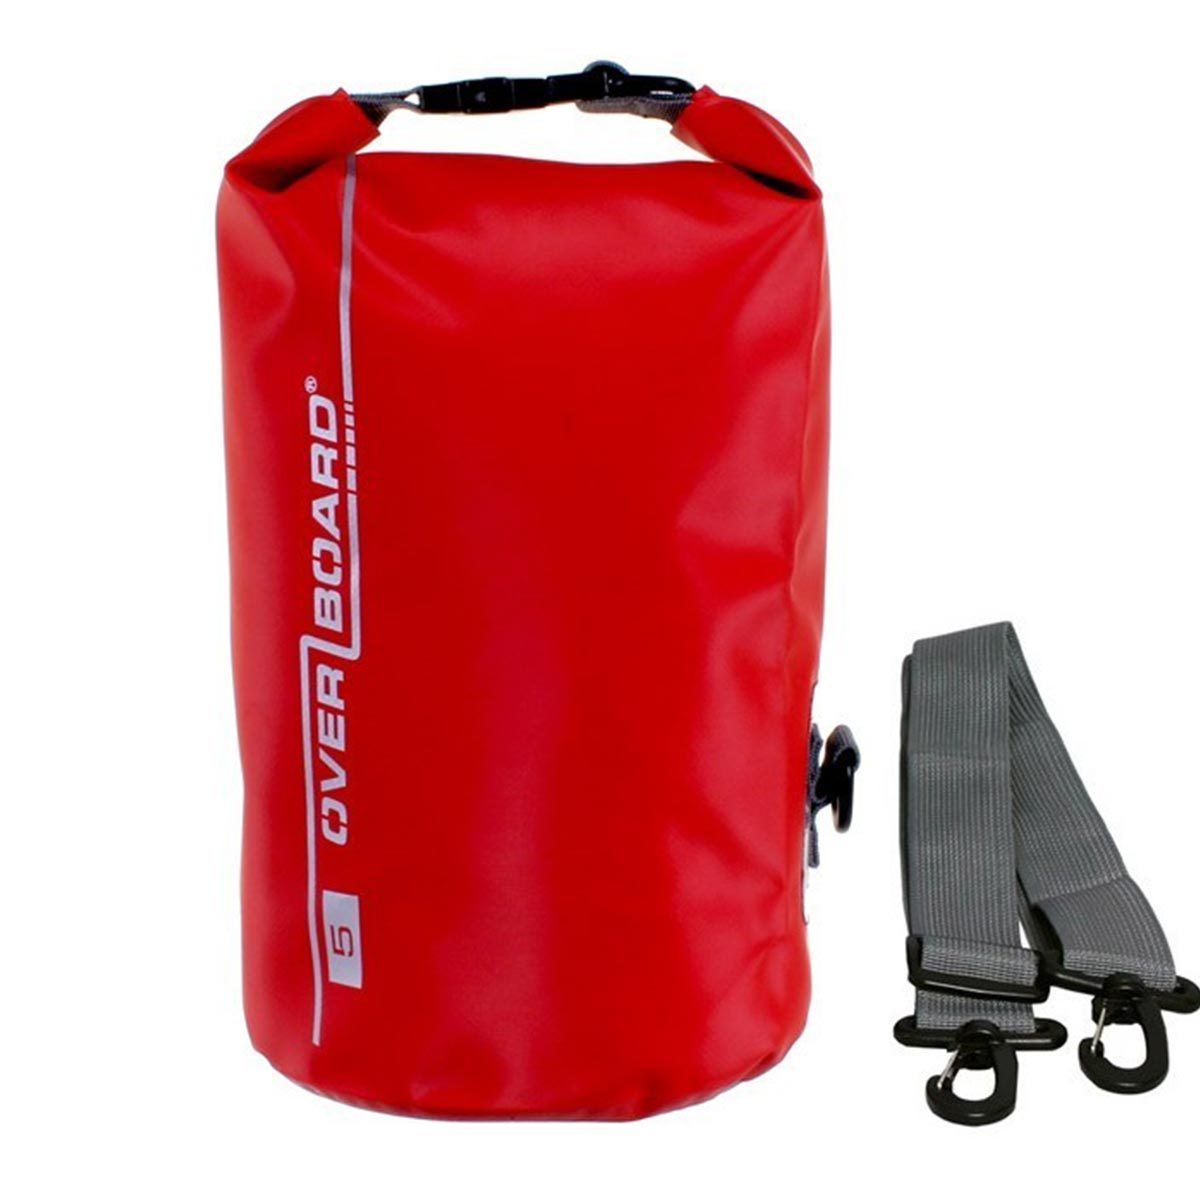 Overboard 5 Litre Dry Tube Bag Bags, Packs and Cases Overboard Red Tactical Gear Supplier Tactical Distributors Australia